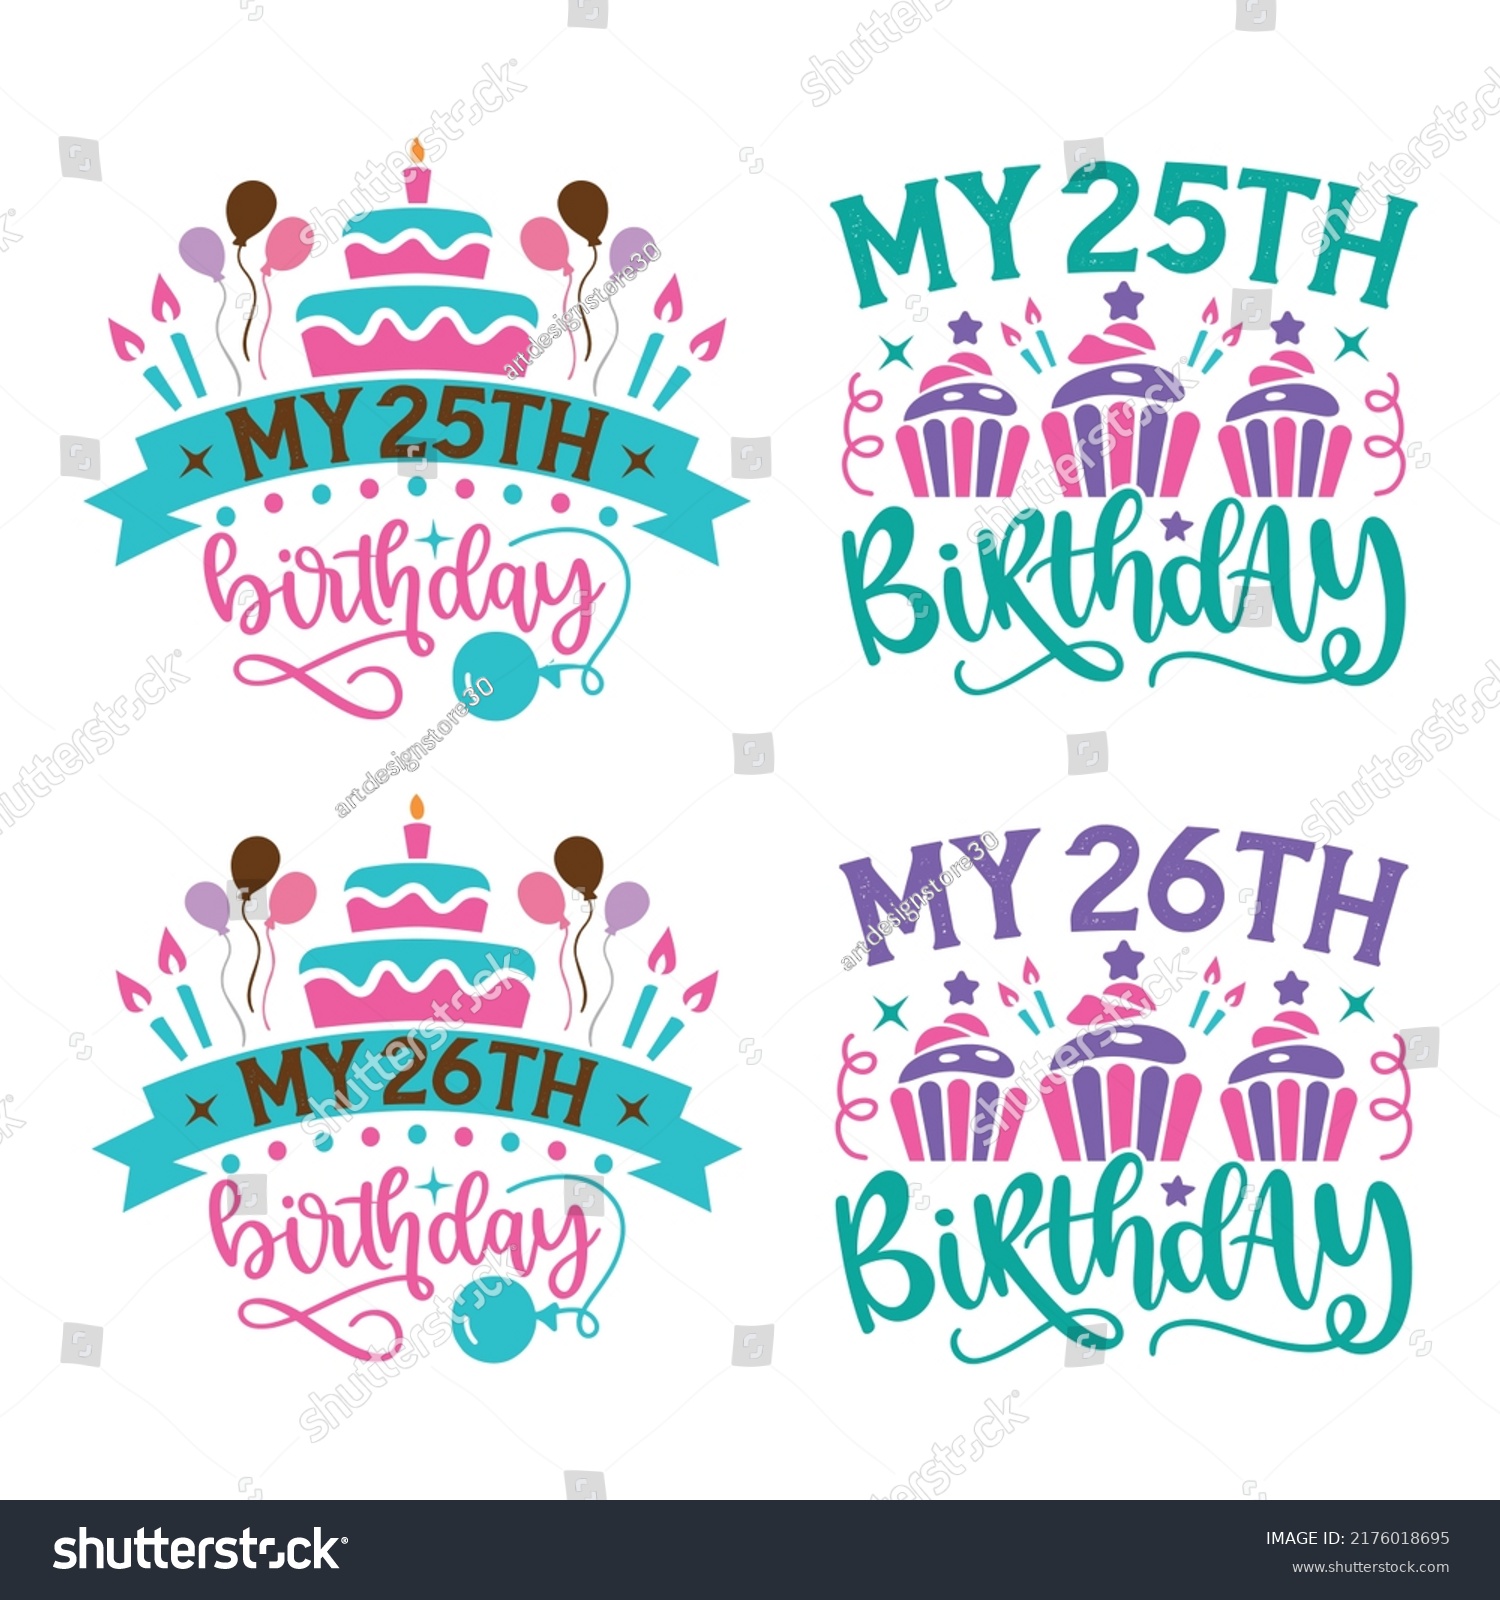 SVG of Happy Birthday T-shirt And SVG Design Bundle, Happy Birthday card design elements. Birthday party design for Vector graphic design. Vector EPS Editable File Bundle, can you download this bundle. svg